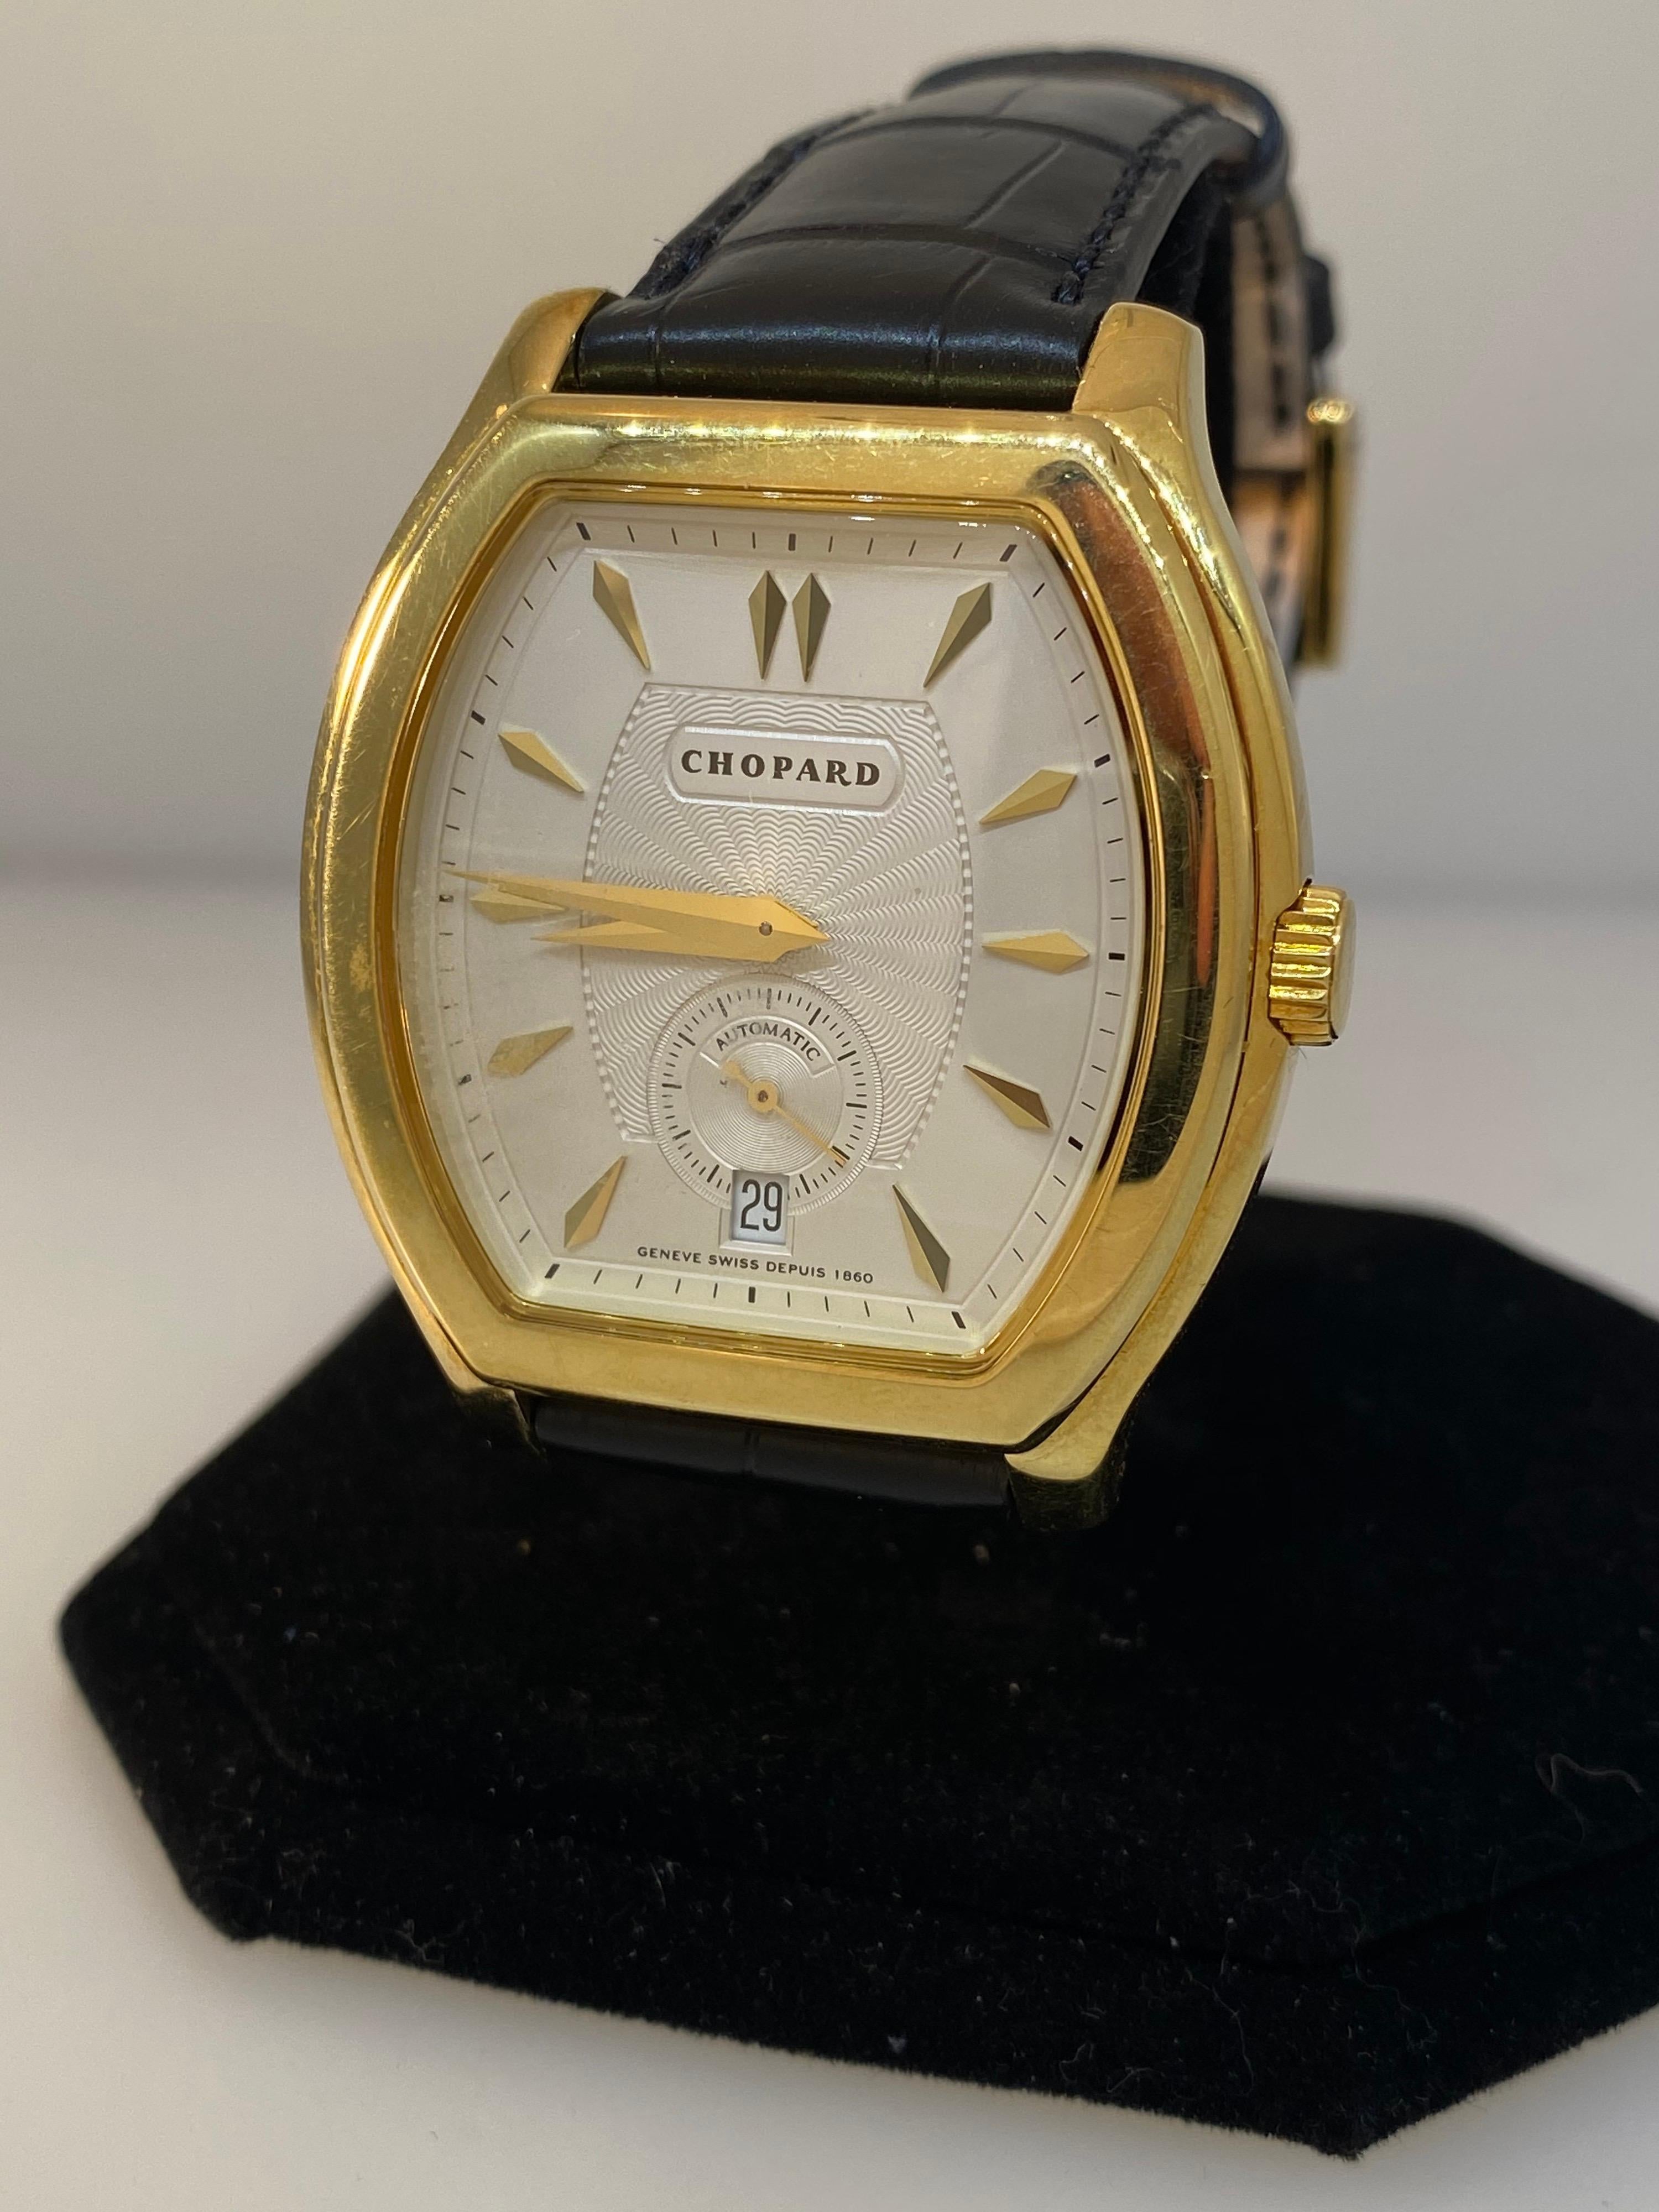 Chopard L.U.C. Prince Foundation Watch

Model Number: 16/2267

Limited Edition to 1860 Pieces

100% Authentic

New (Old Stock)

Comes with original Chopard box and instruction manual

18 Karat Yellow Gold

Sapphire Crystal

Silver Guilloche